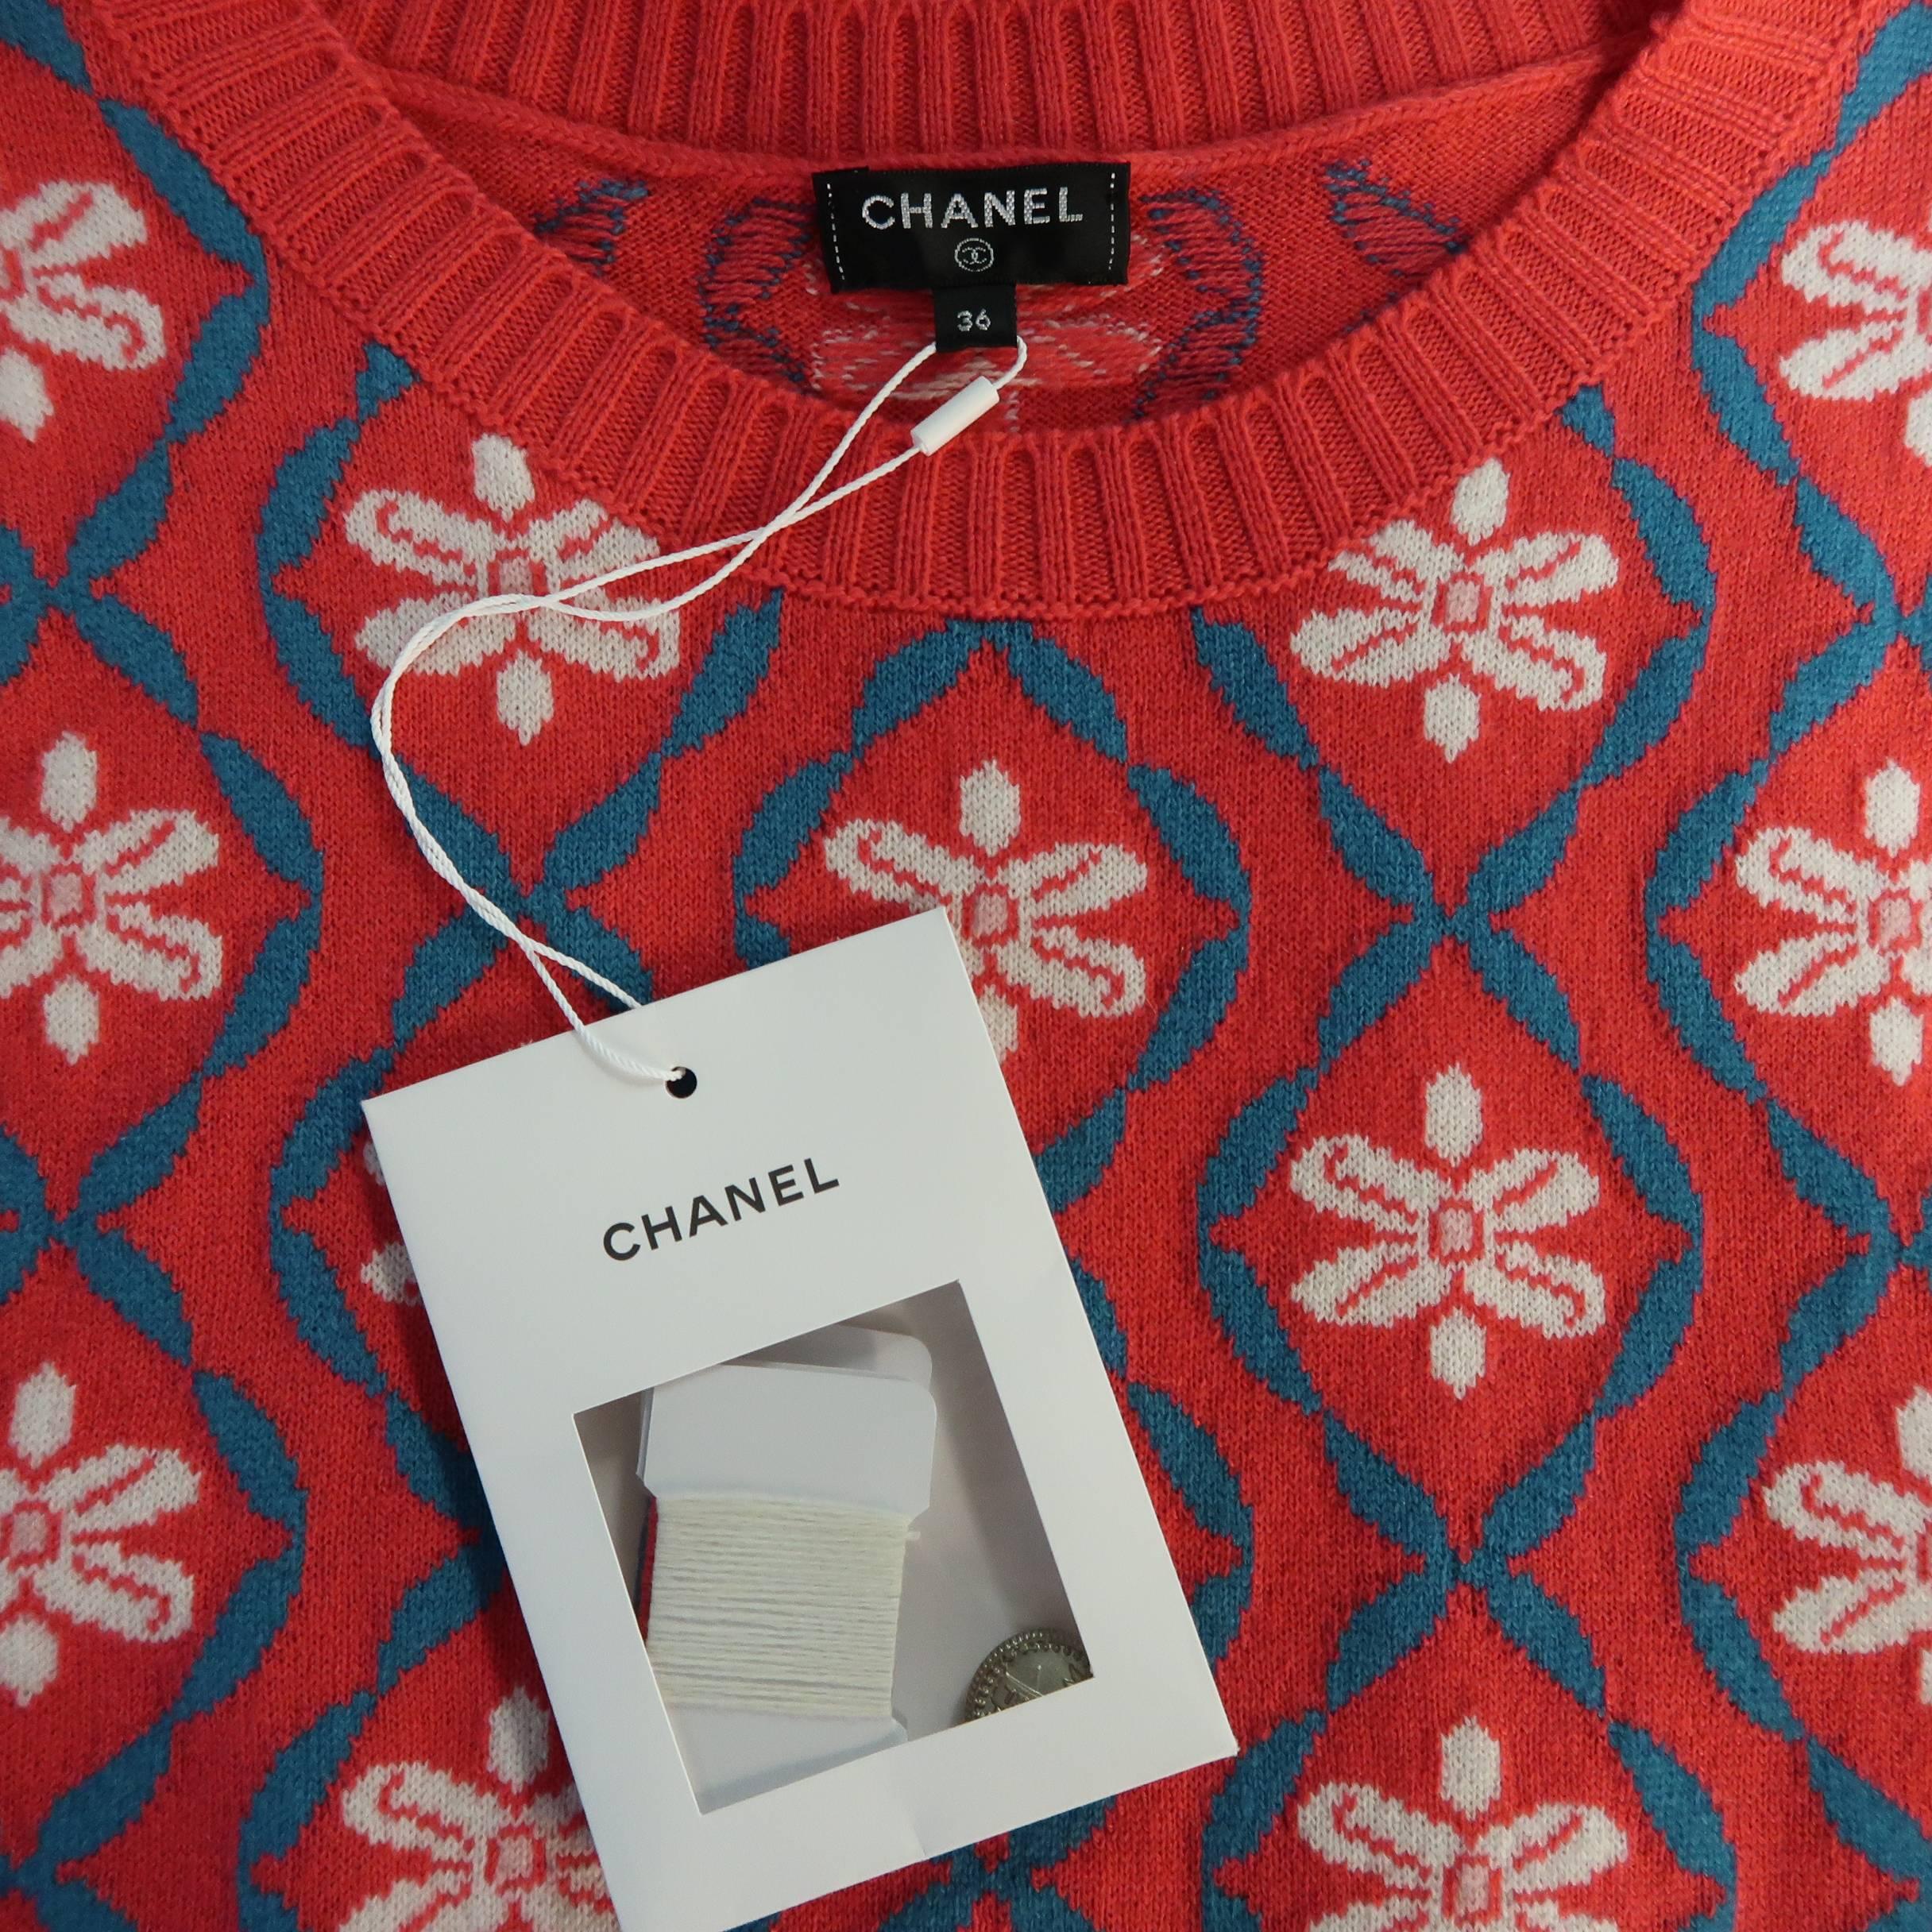 CHANEL Size 4 Coral & Teal Floral Print Cashmere Sleeveless Shift Sweater Dress 2